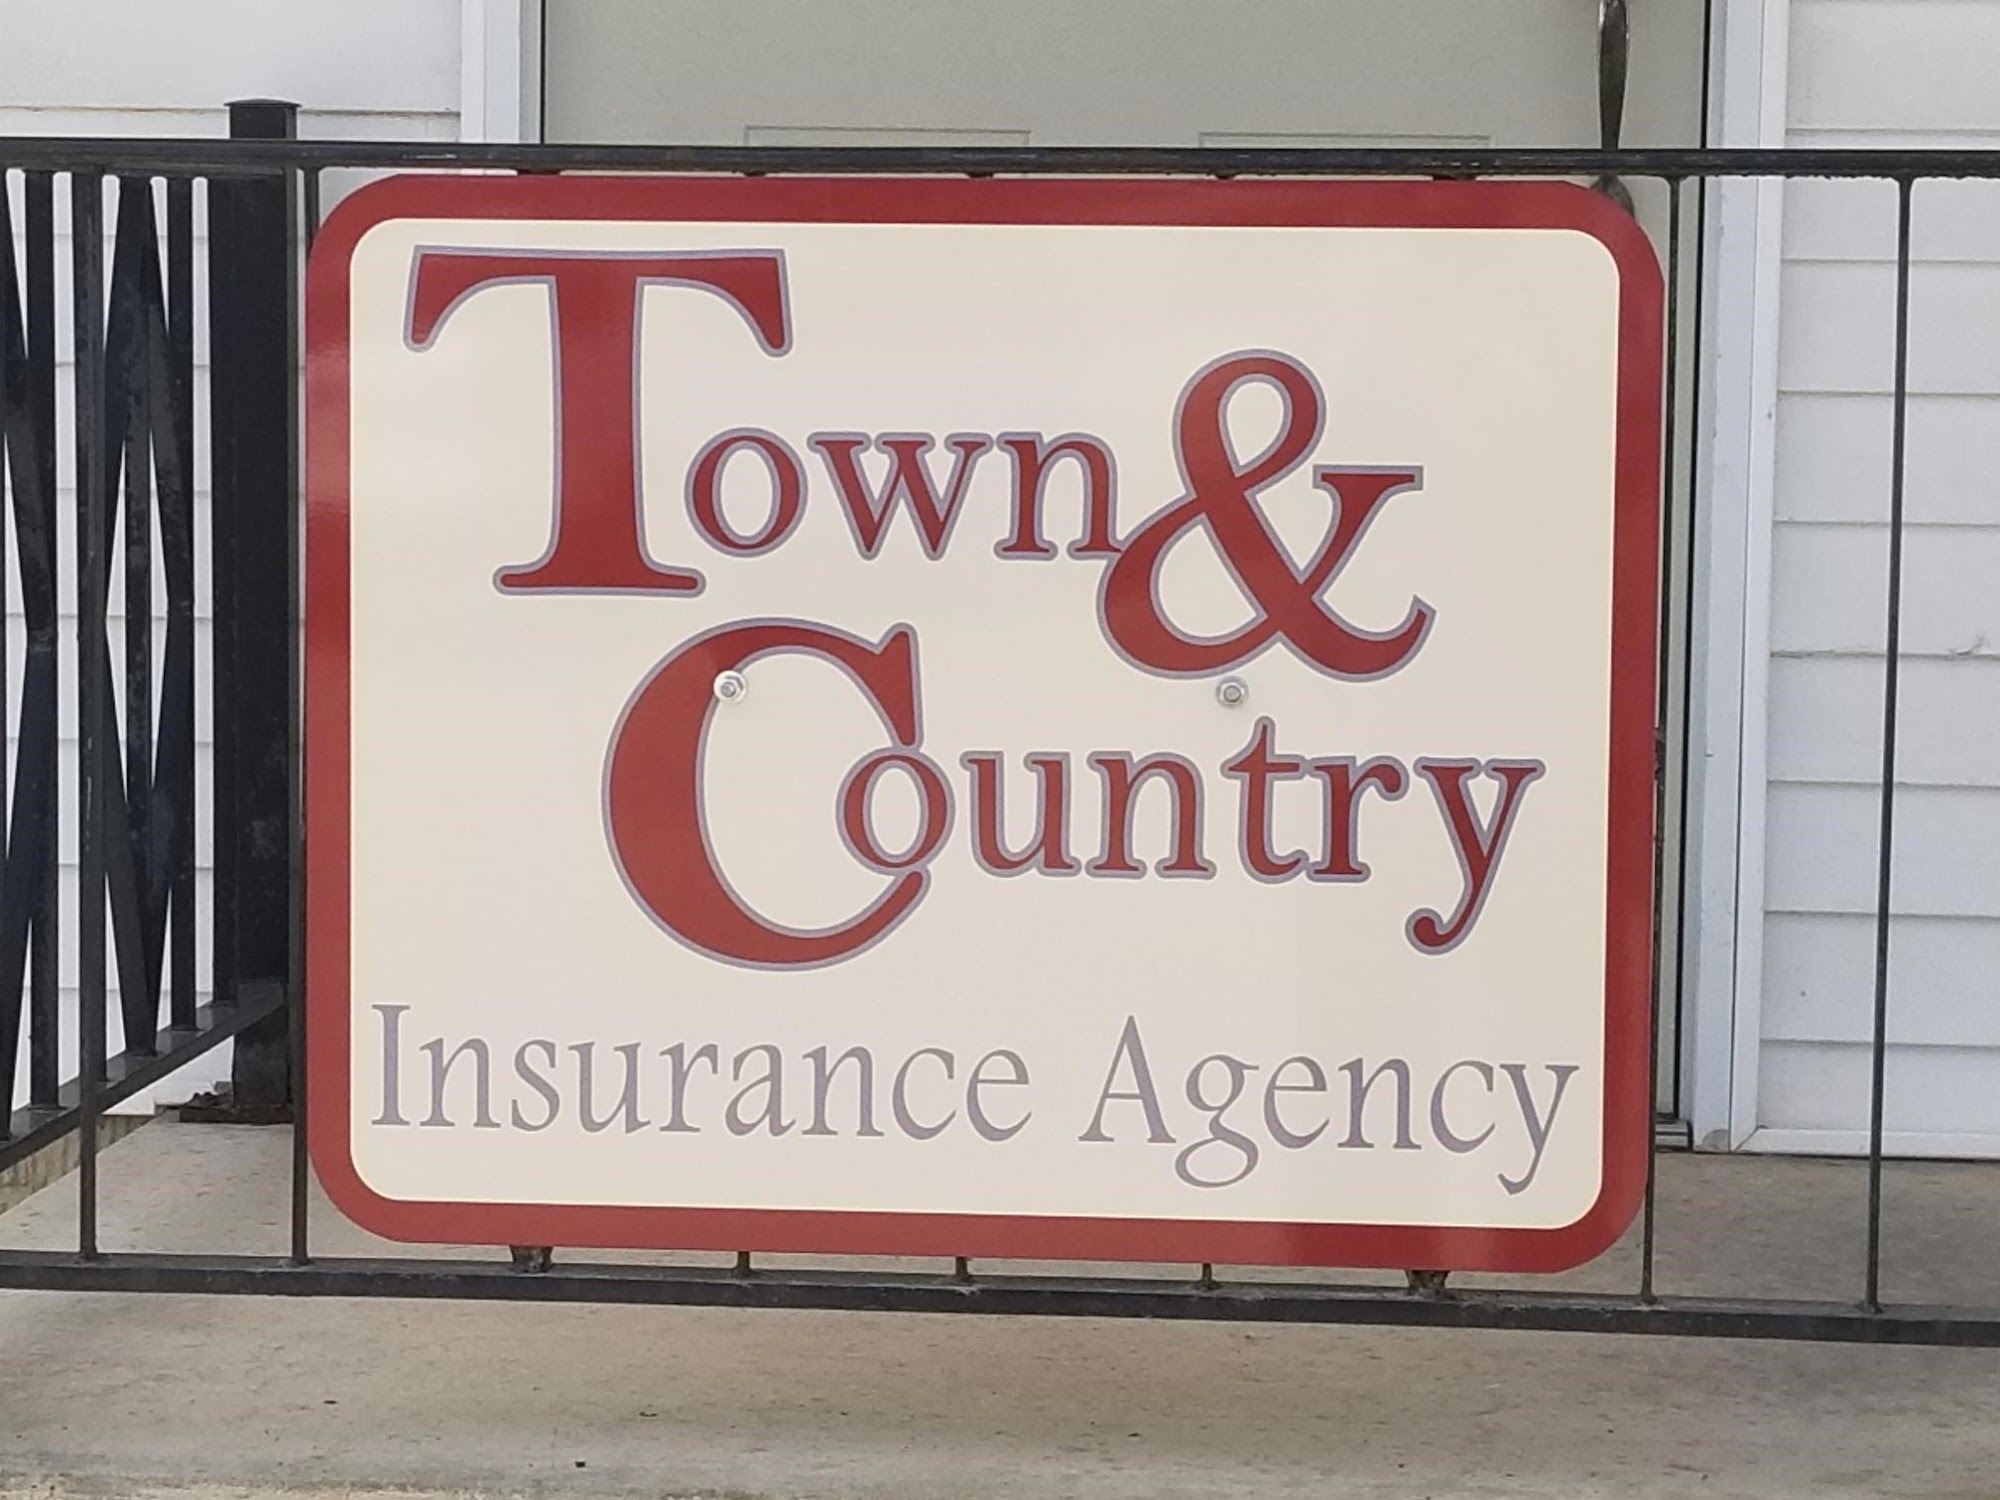 Town & Country Insurance Agency 711 Main St, Osage Iowa 50461